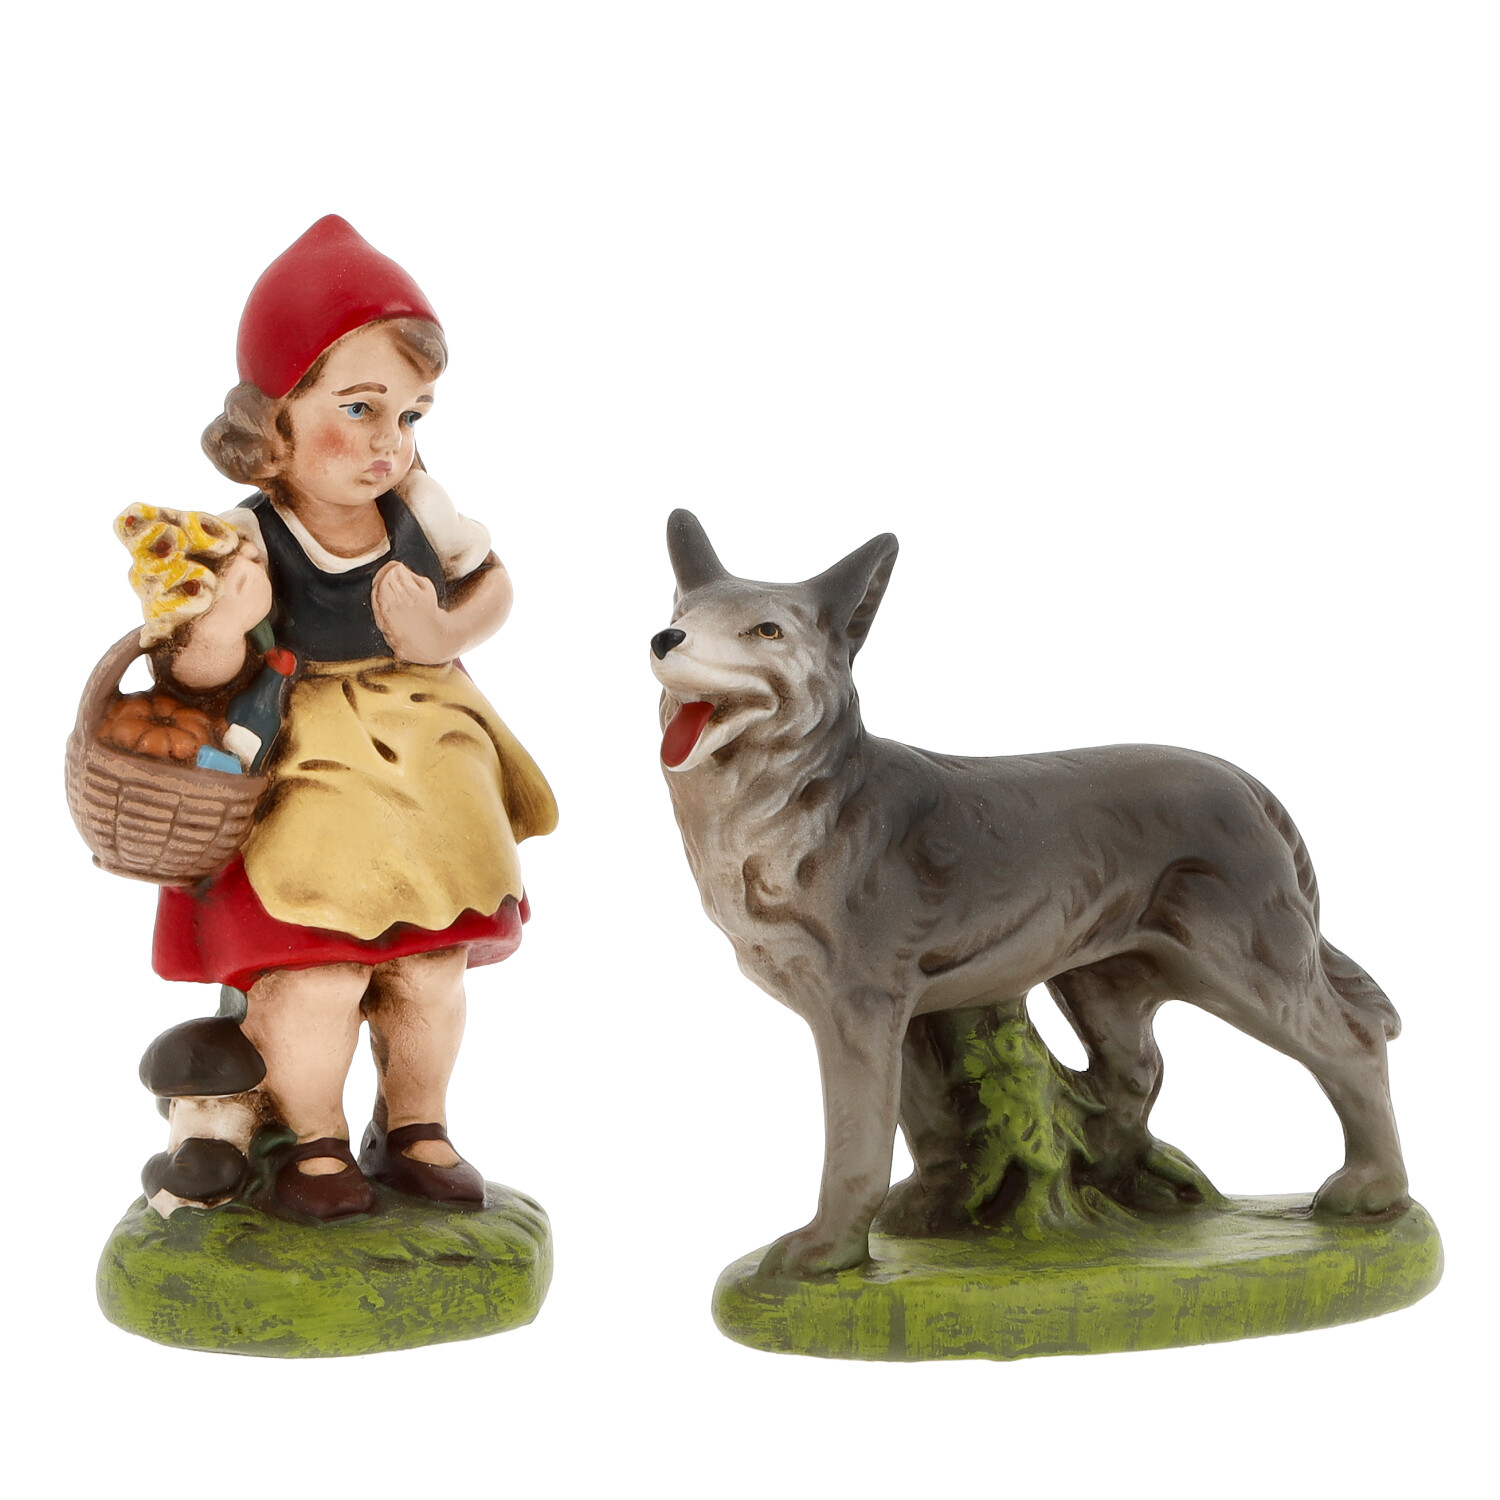 Little red riding hood and wolf - German fairy tale figure - Brothers Grimm - Marolin - made in Germany